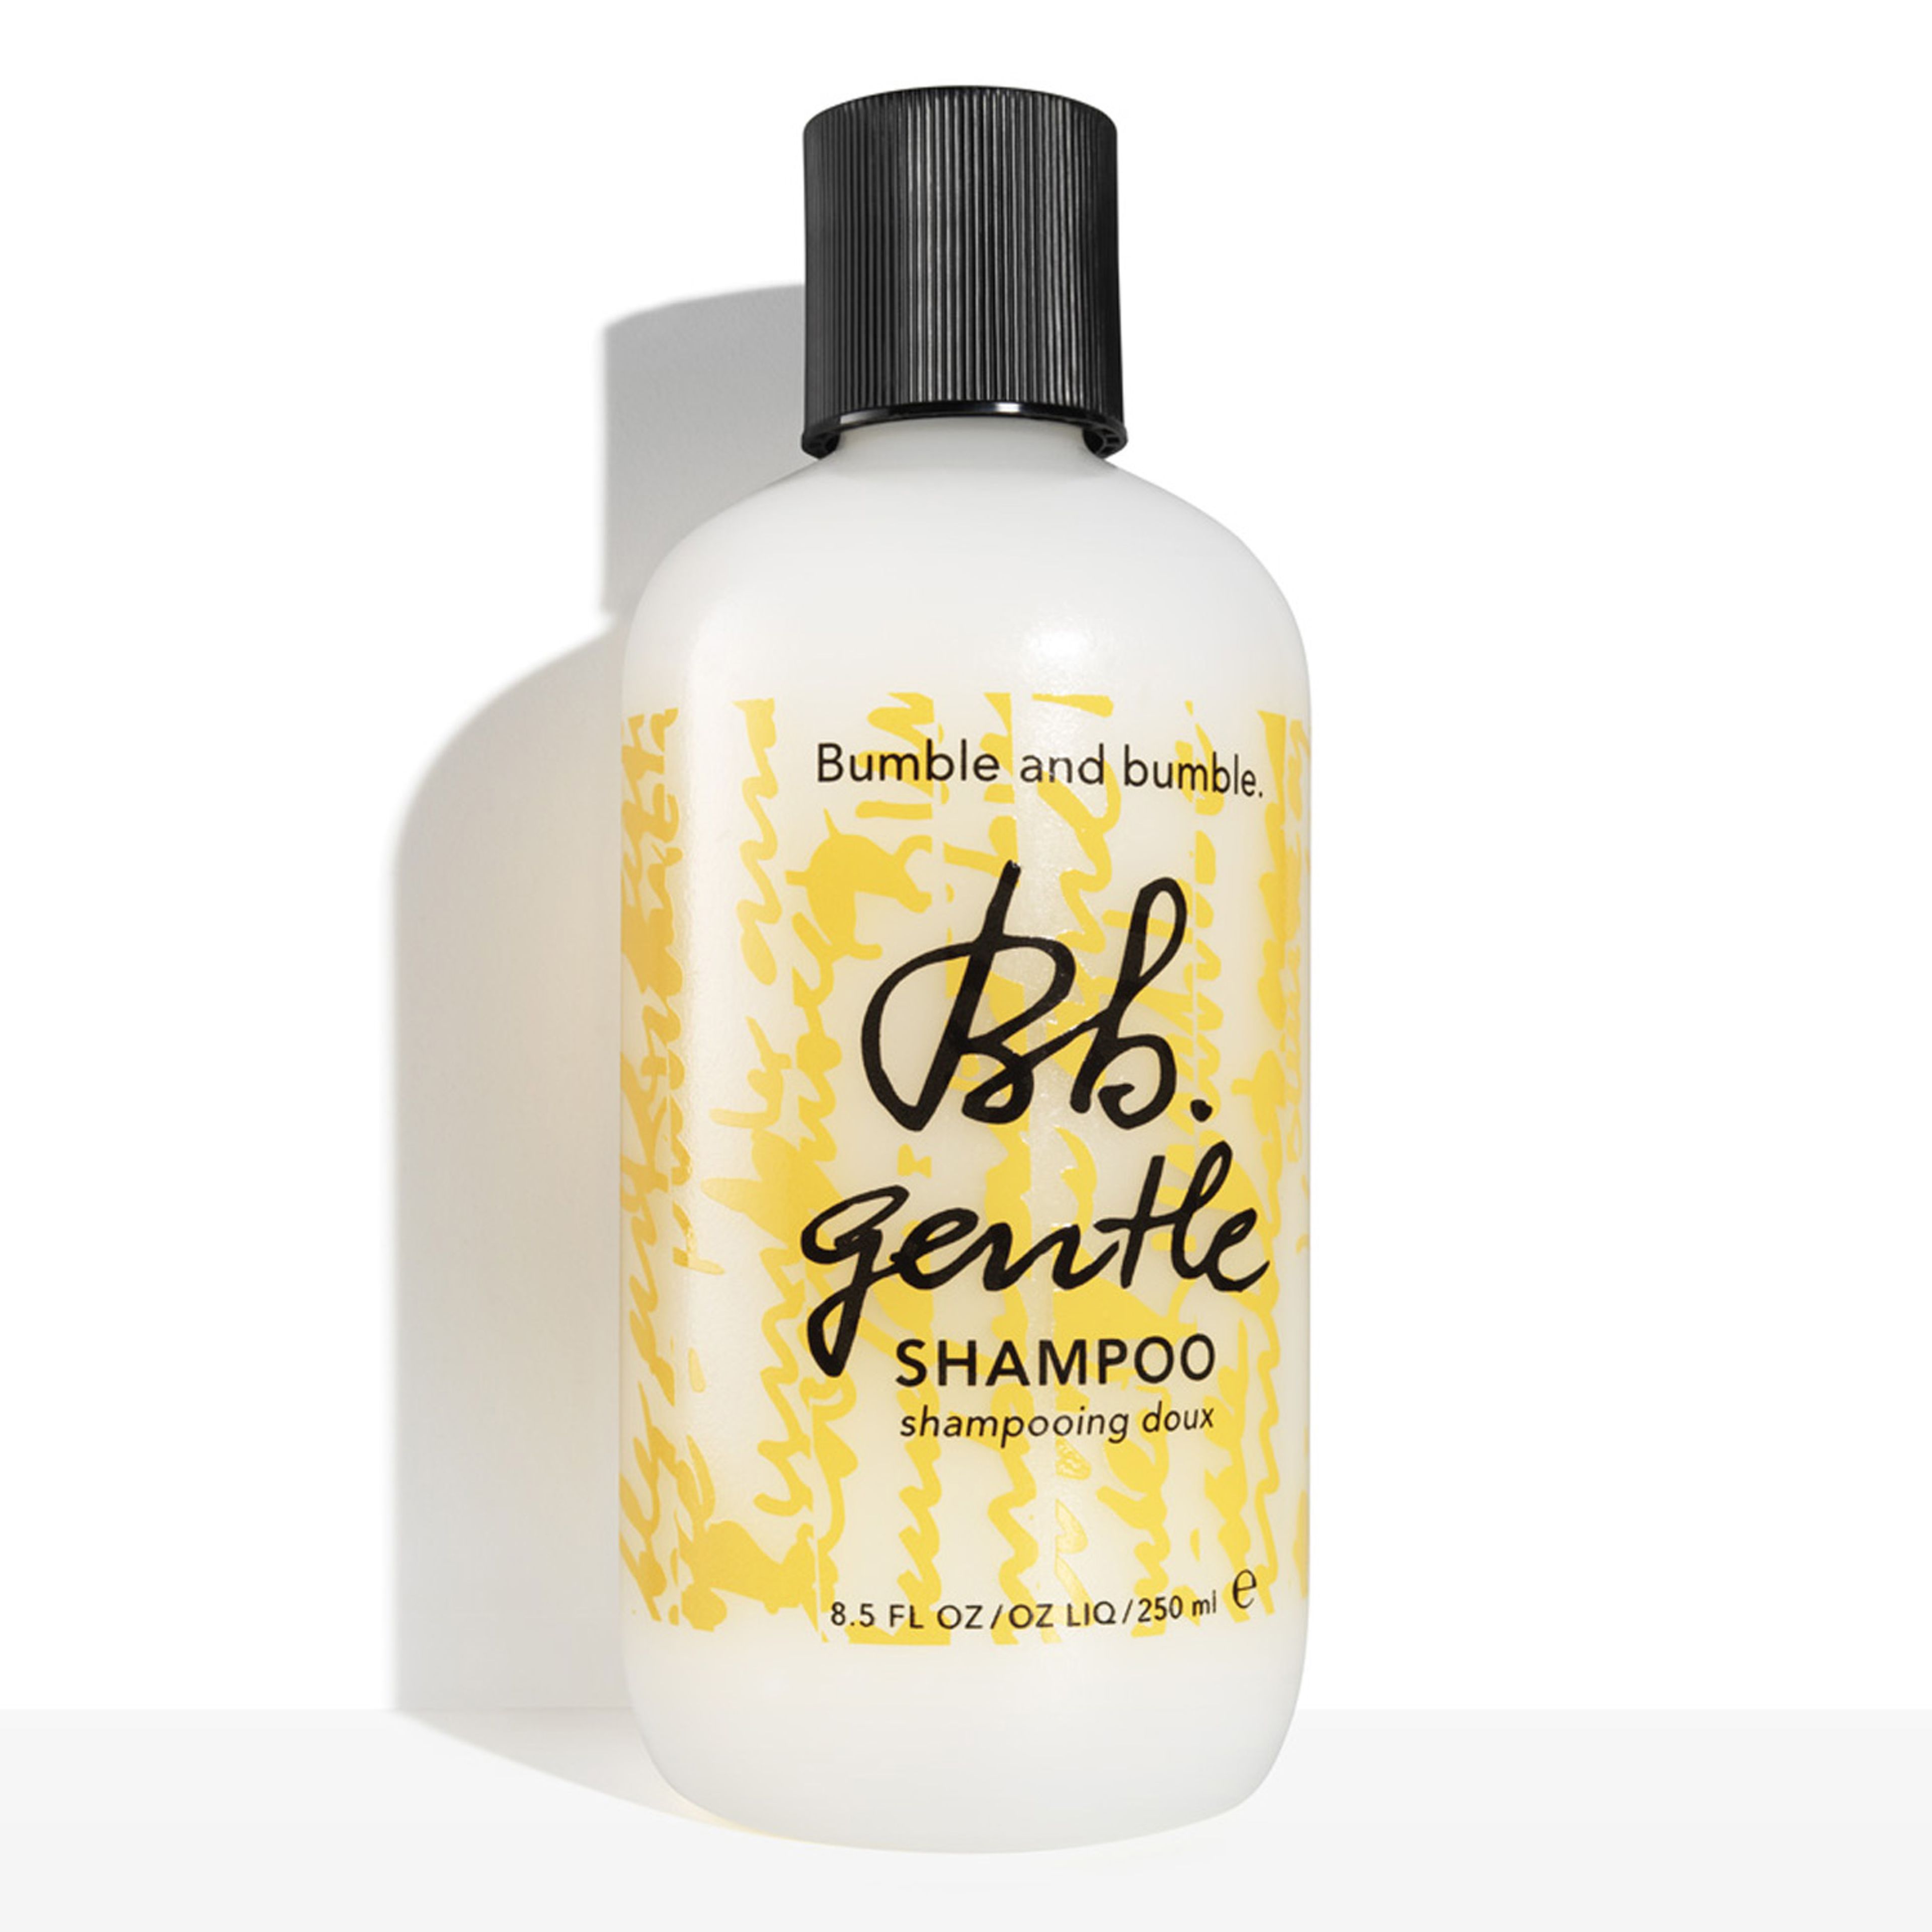 Bumble and bumble Gentle Shampoo 1